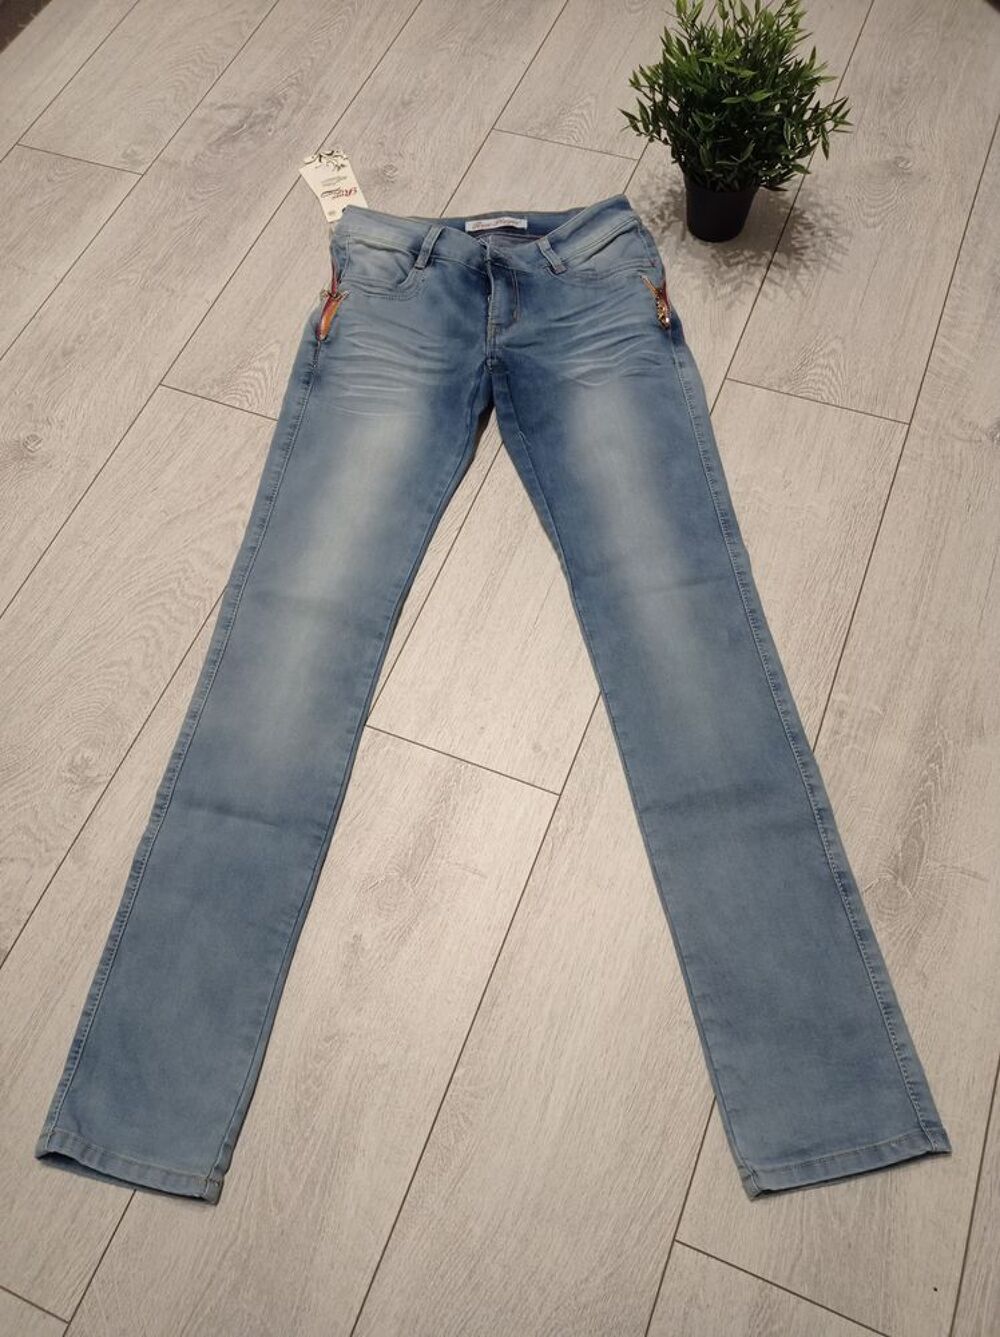 Jeans taille 36 neuf Vtements